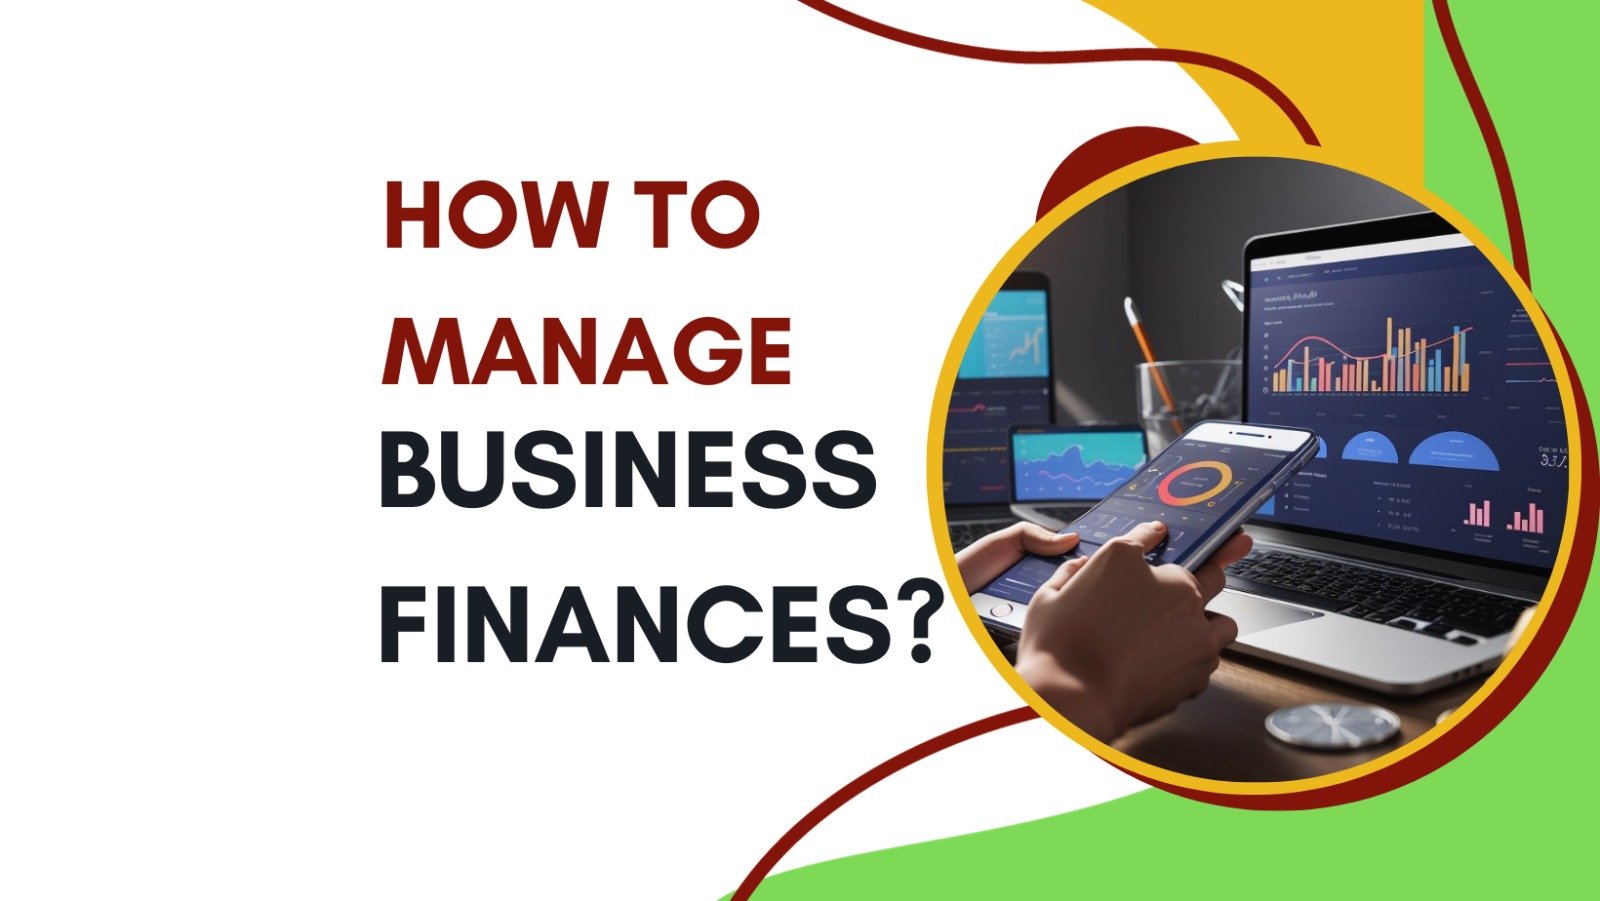 How to Manage Business Finances?